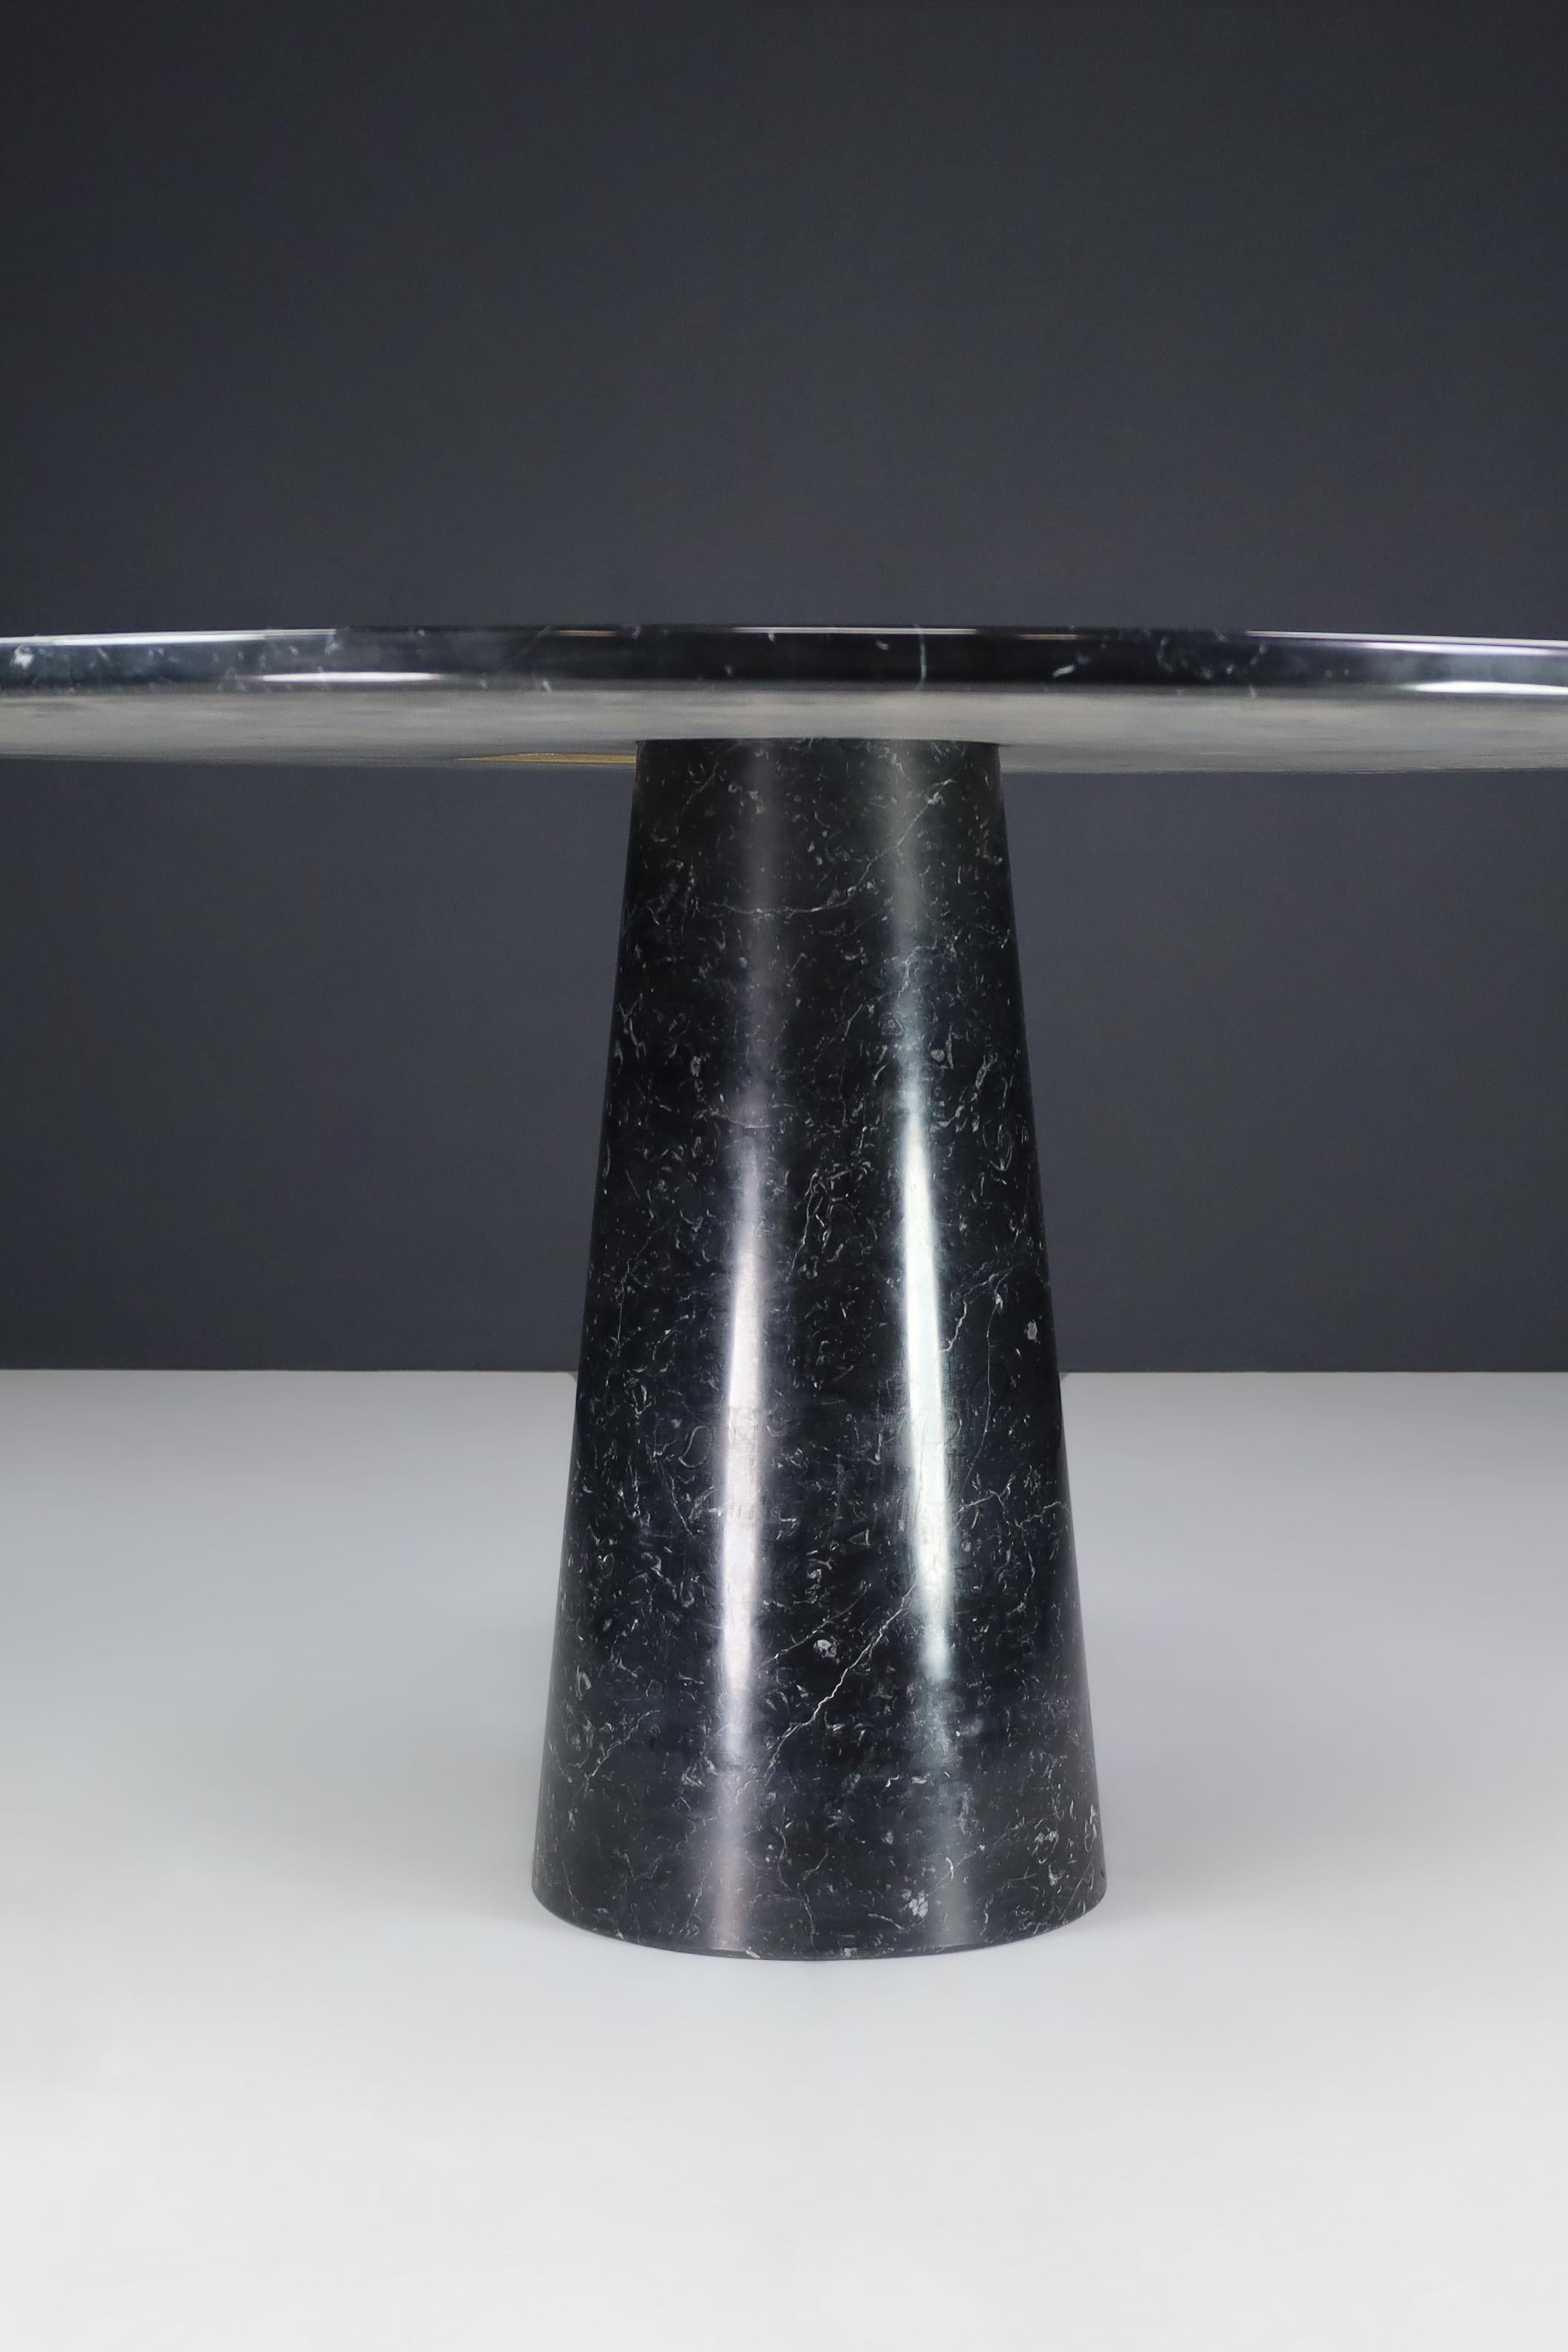 Angelo Mangiarotti for Skipper 'Eros' Round Dining Table in Marquina Marble 1970 For Sale 6